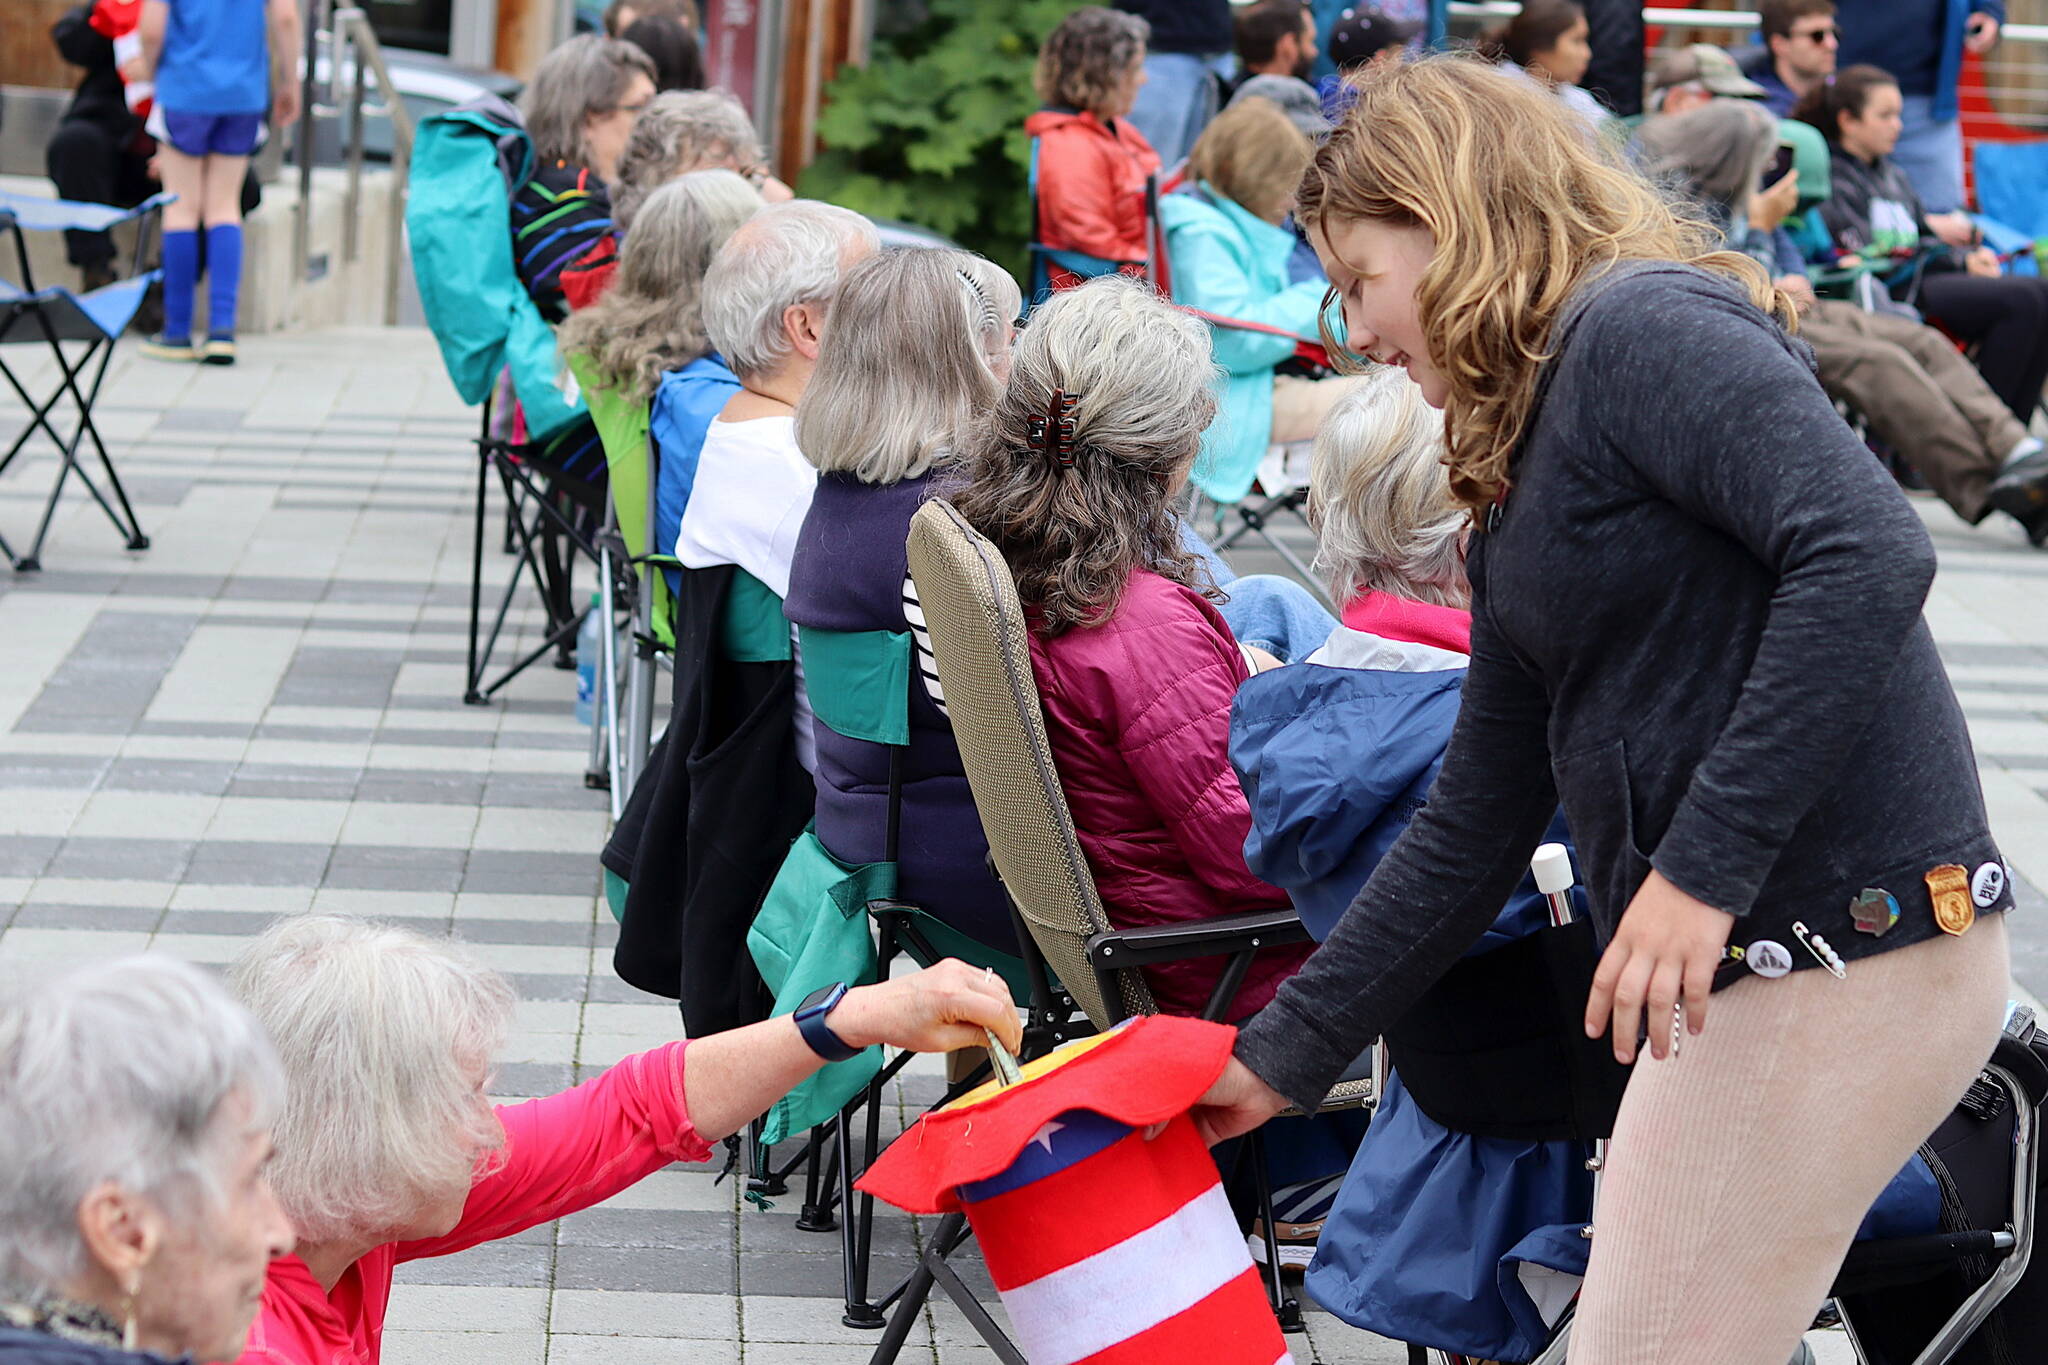 Gabi Williams collects donations on behalf of Juneau Community Bands from people in the audience during a concert by the Juneau Volunteer Marching Band on Sunday at Sealaska Heritage Plaza. (Mark Sabbatini / Juneau Empire)